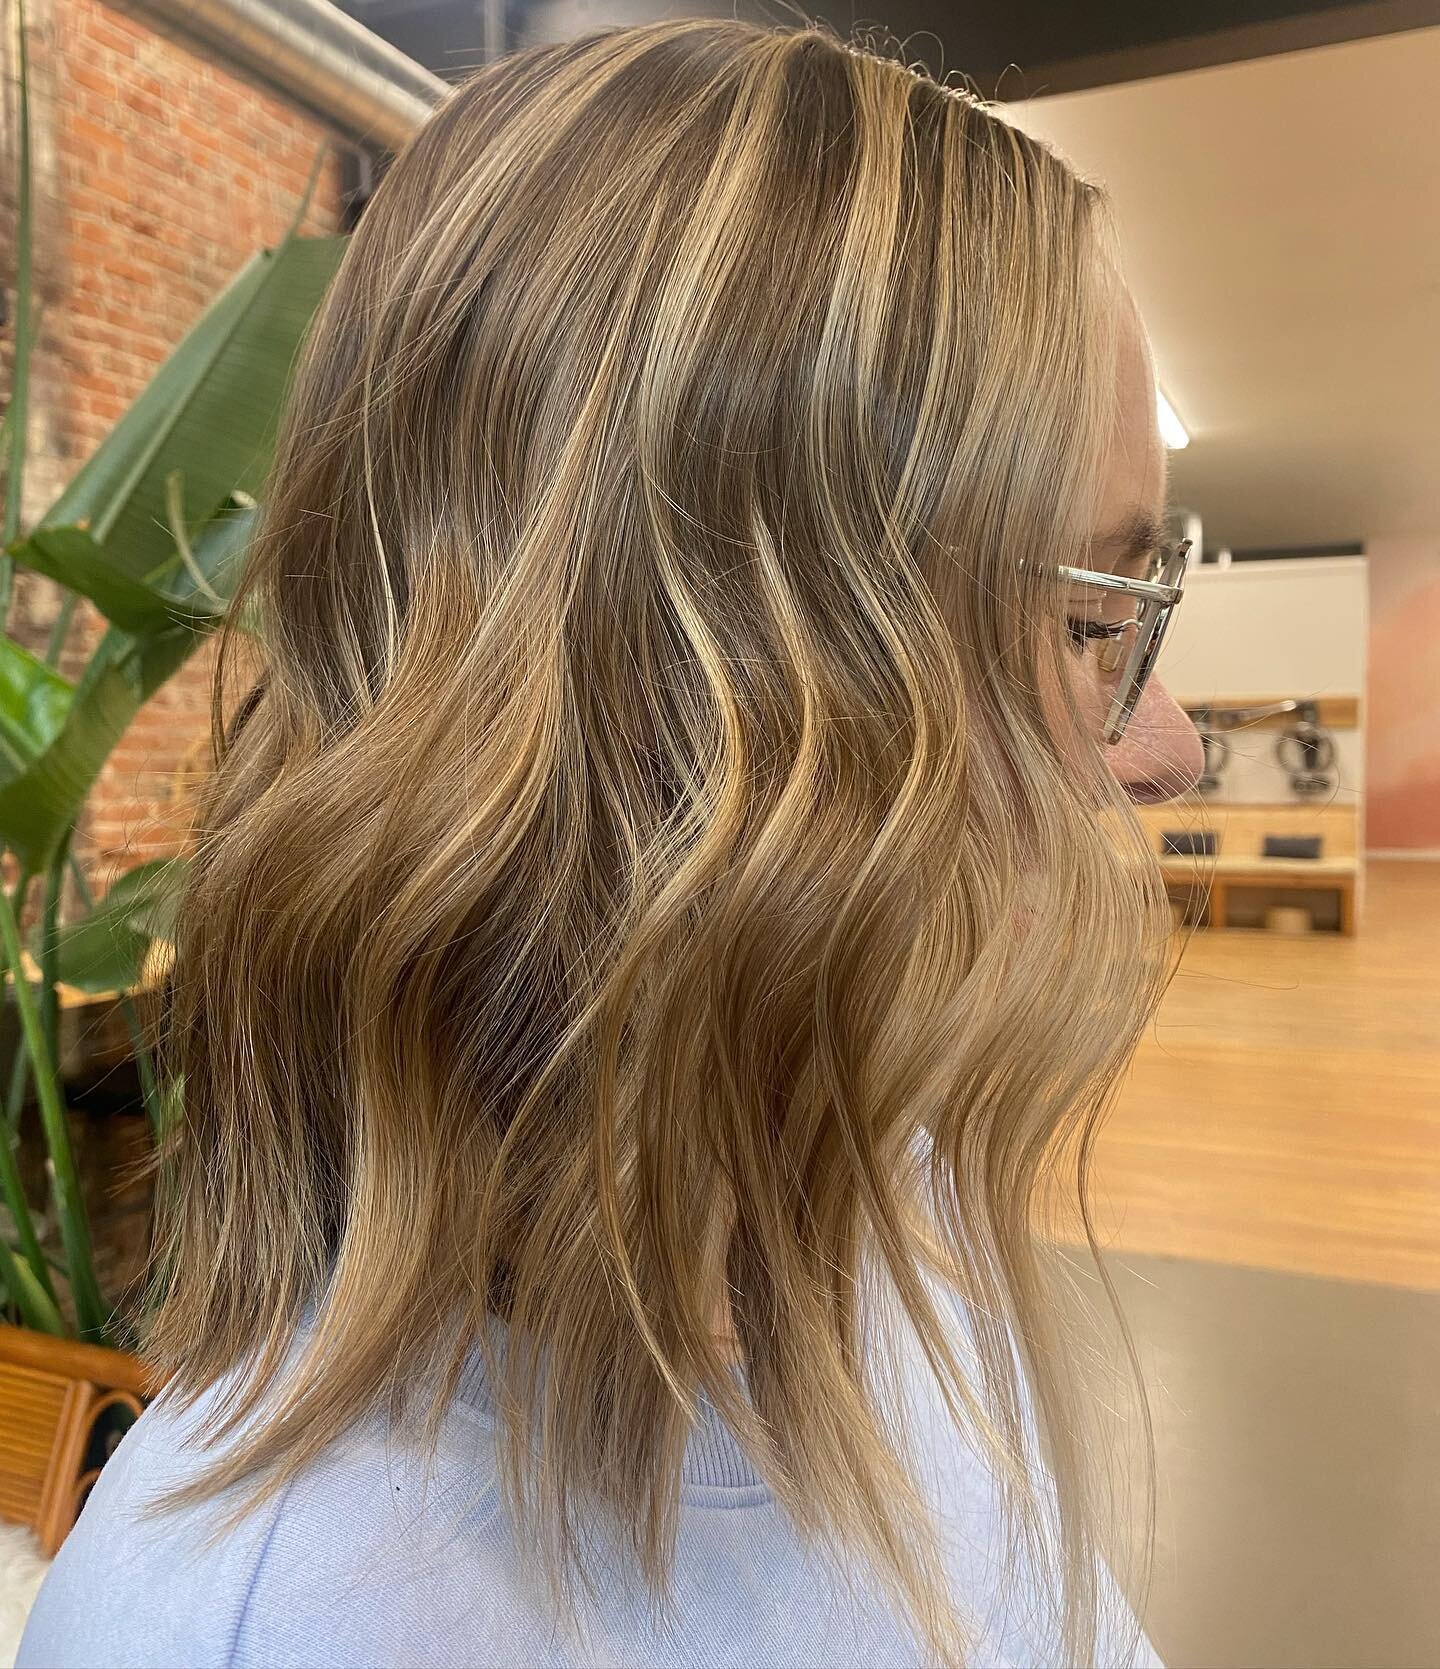 Simple never basic 🌞

#pnwhairstylist #pnwhairsalon #pnwhairstylists #pnwhairdresser #washingtonhairstylist #washingtonhairsalon #washingtonhairstylists #washingtonhairdresser #washingtonstatehairstylist #seattlehairstylist #seattlehairsalon #seattl